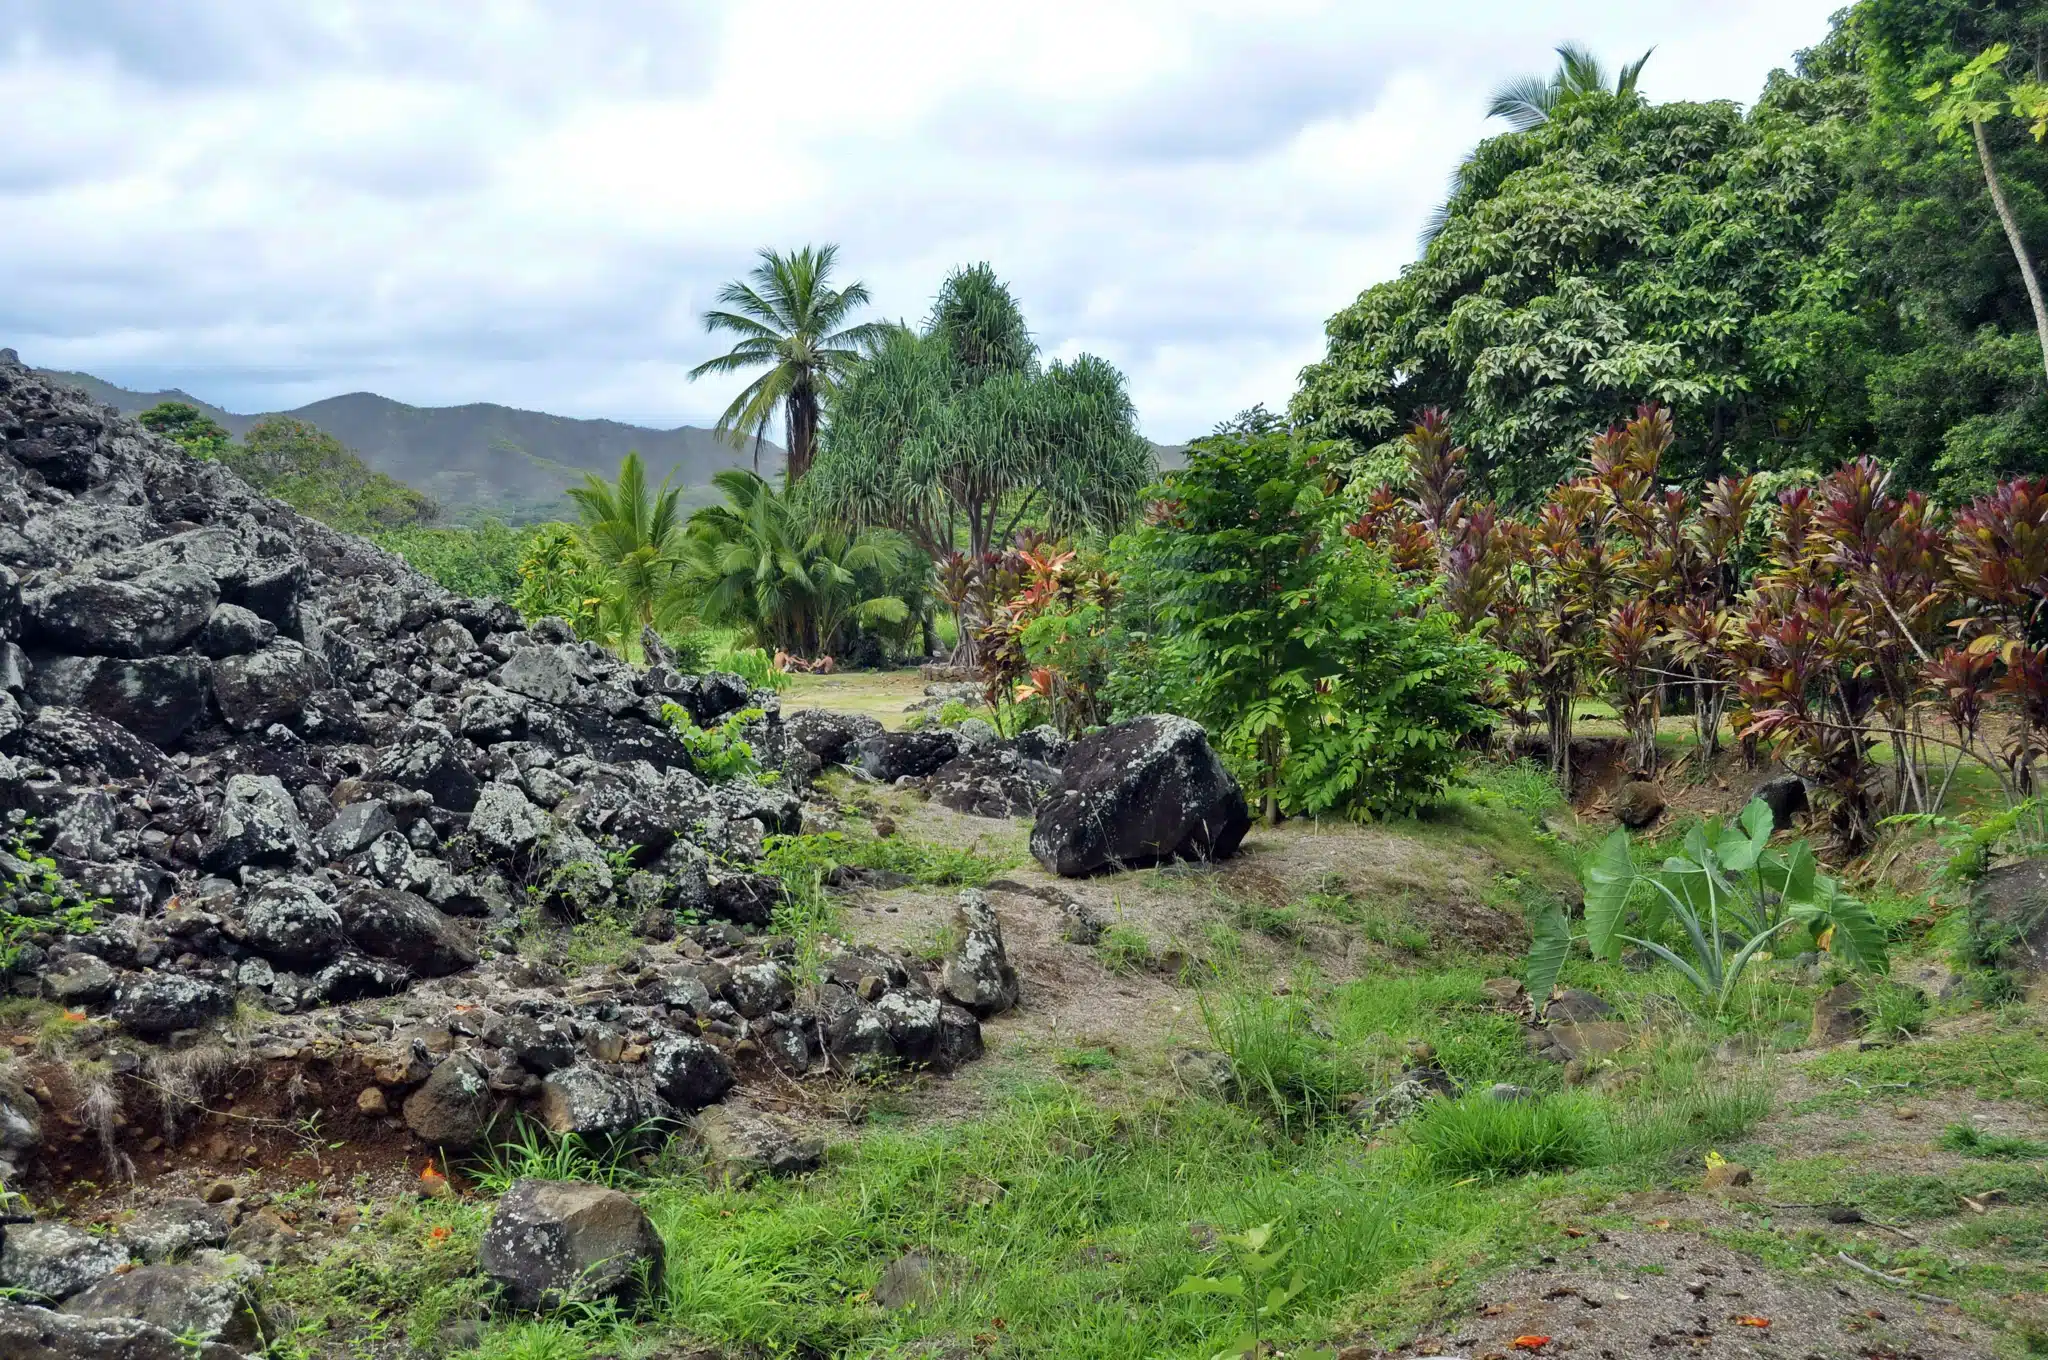 Ulupo Heiau State Historic Site is a State Park located in the city of Kailua on Oahu, Hawaii